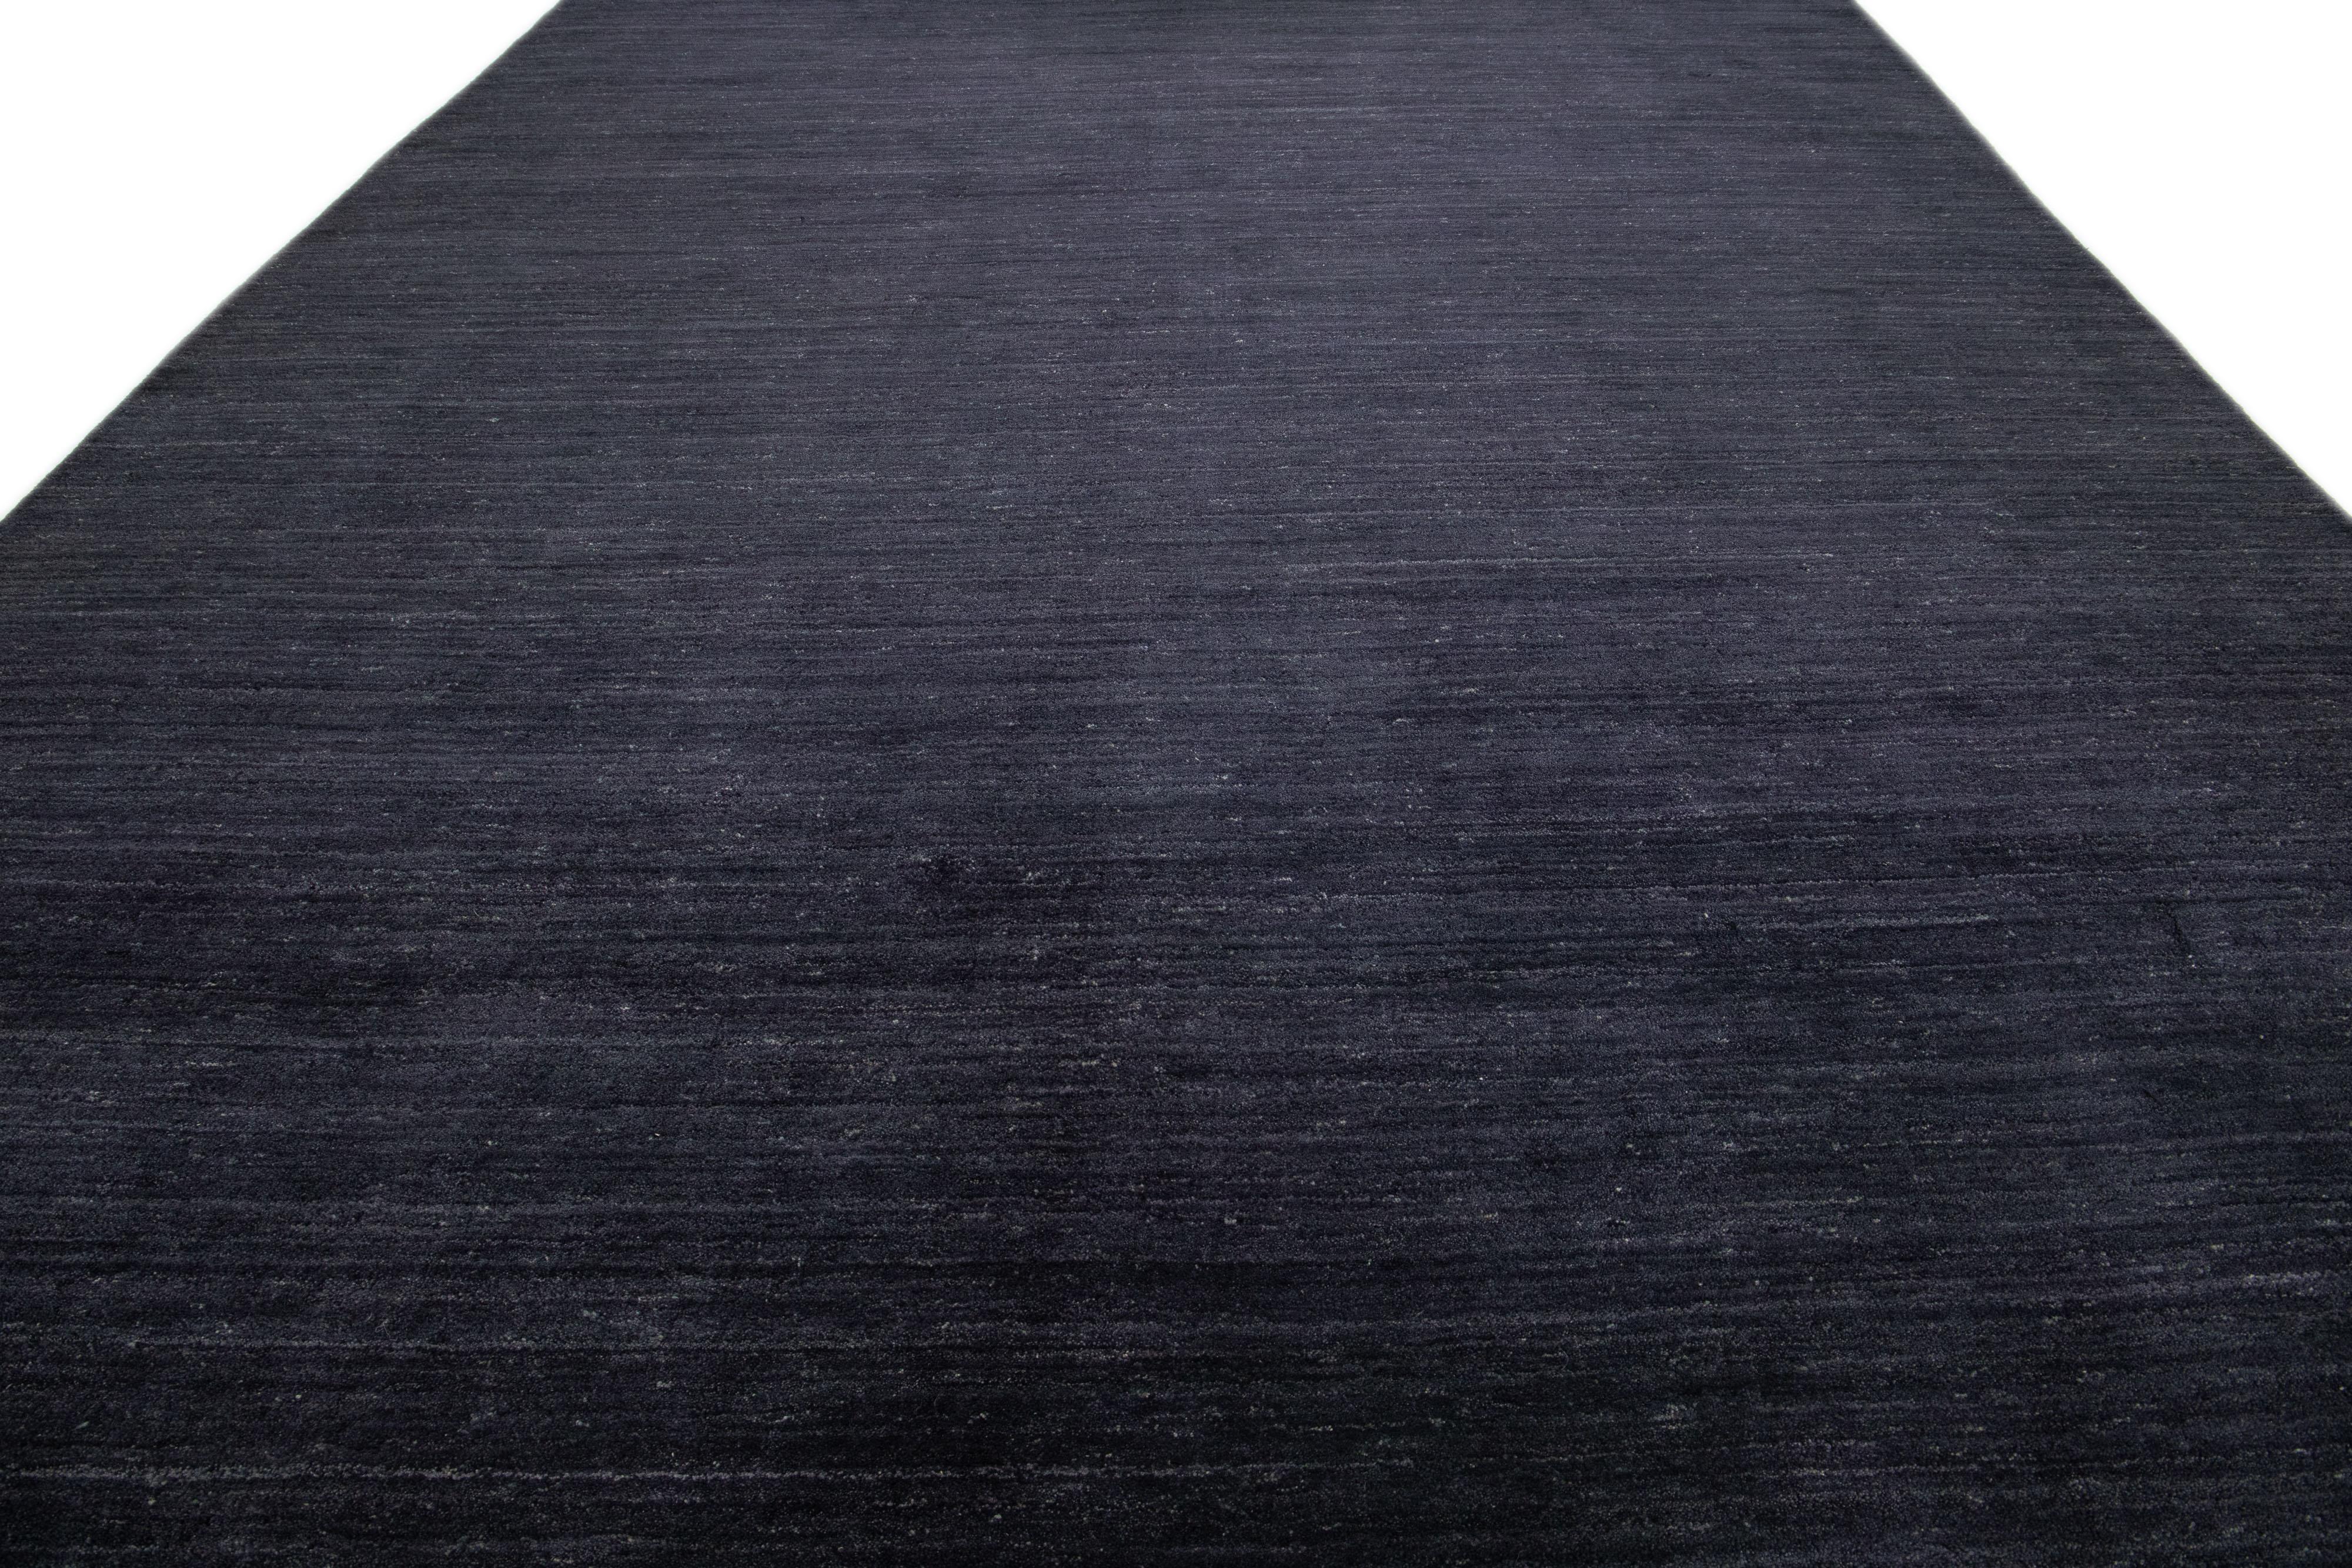 Minimalist Modern Gabbeh Style Handmade Solid Charcoal Motif Oversize Wool Rug For Sale